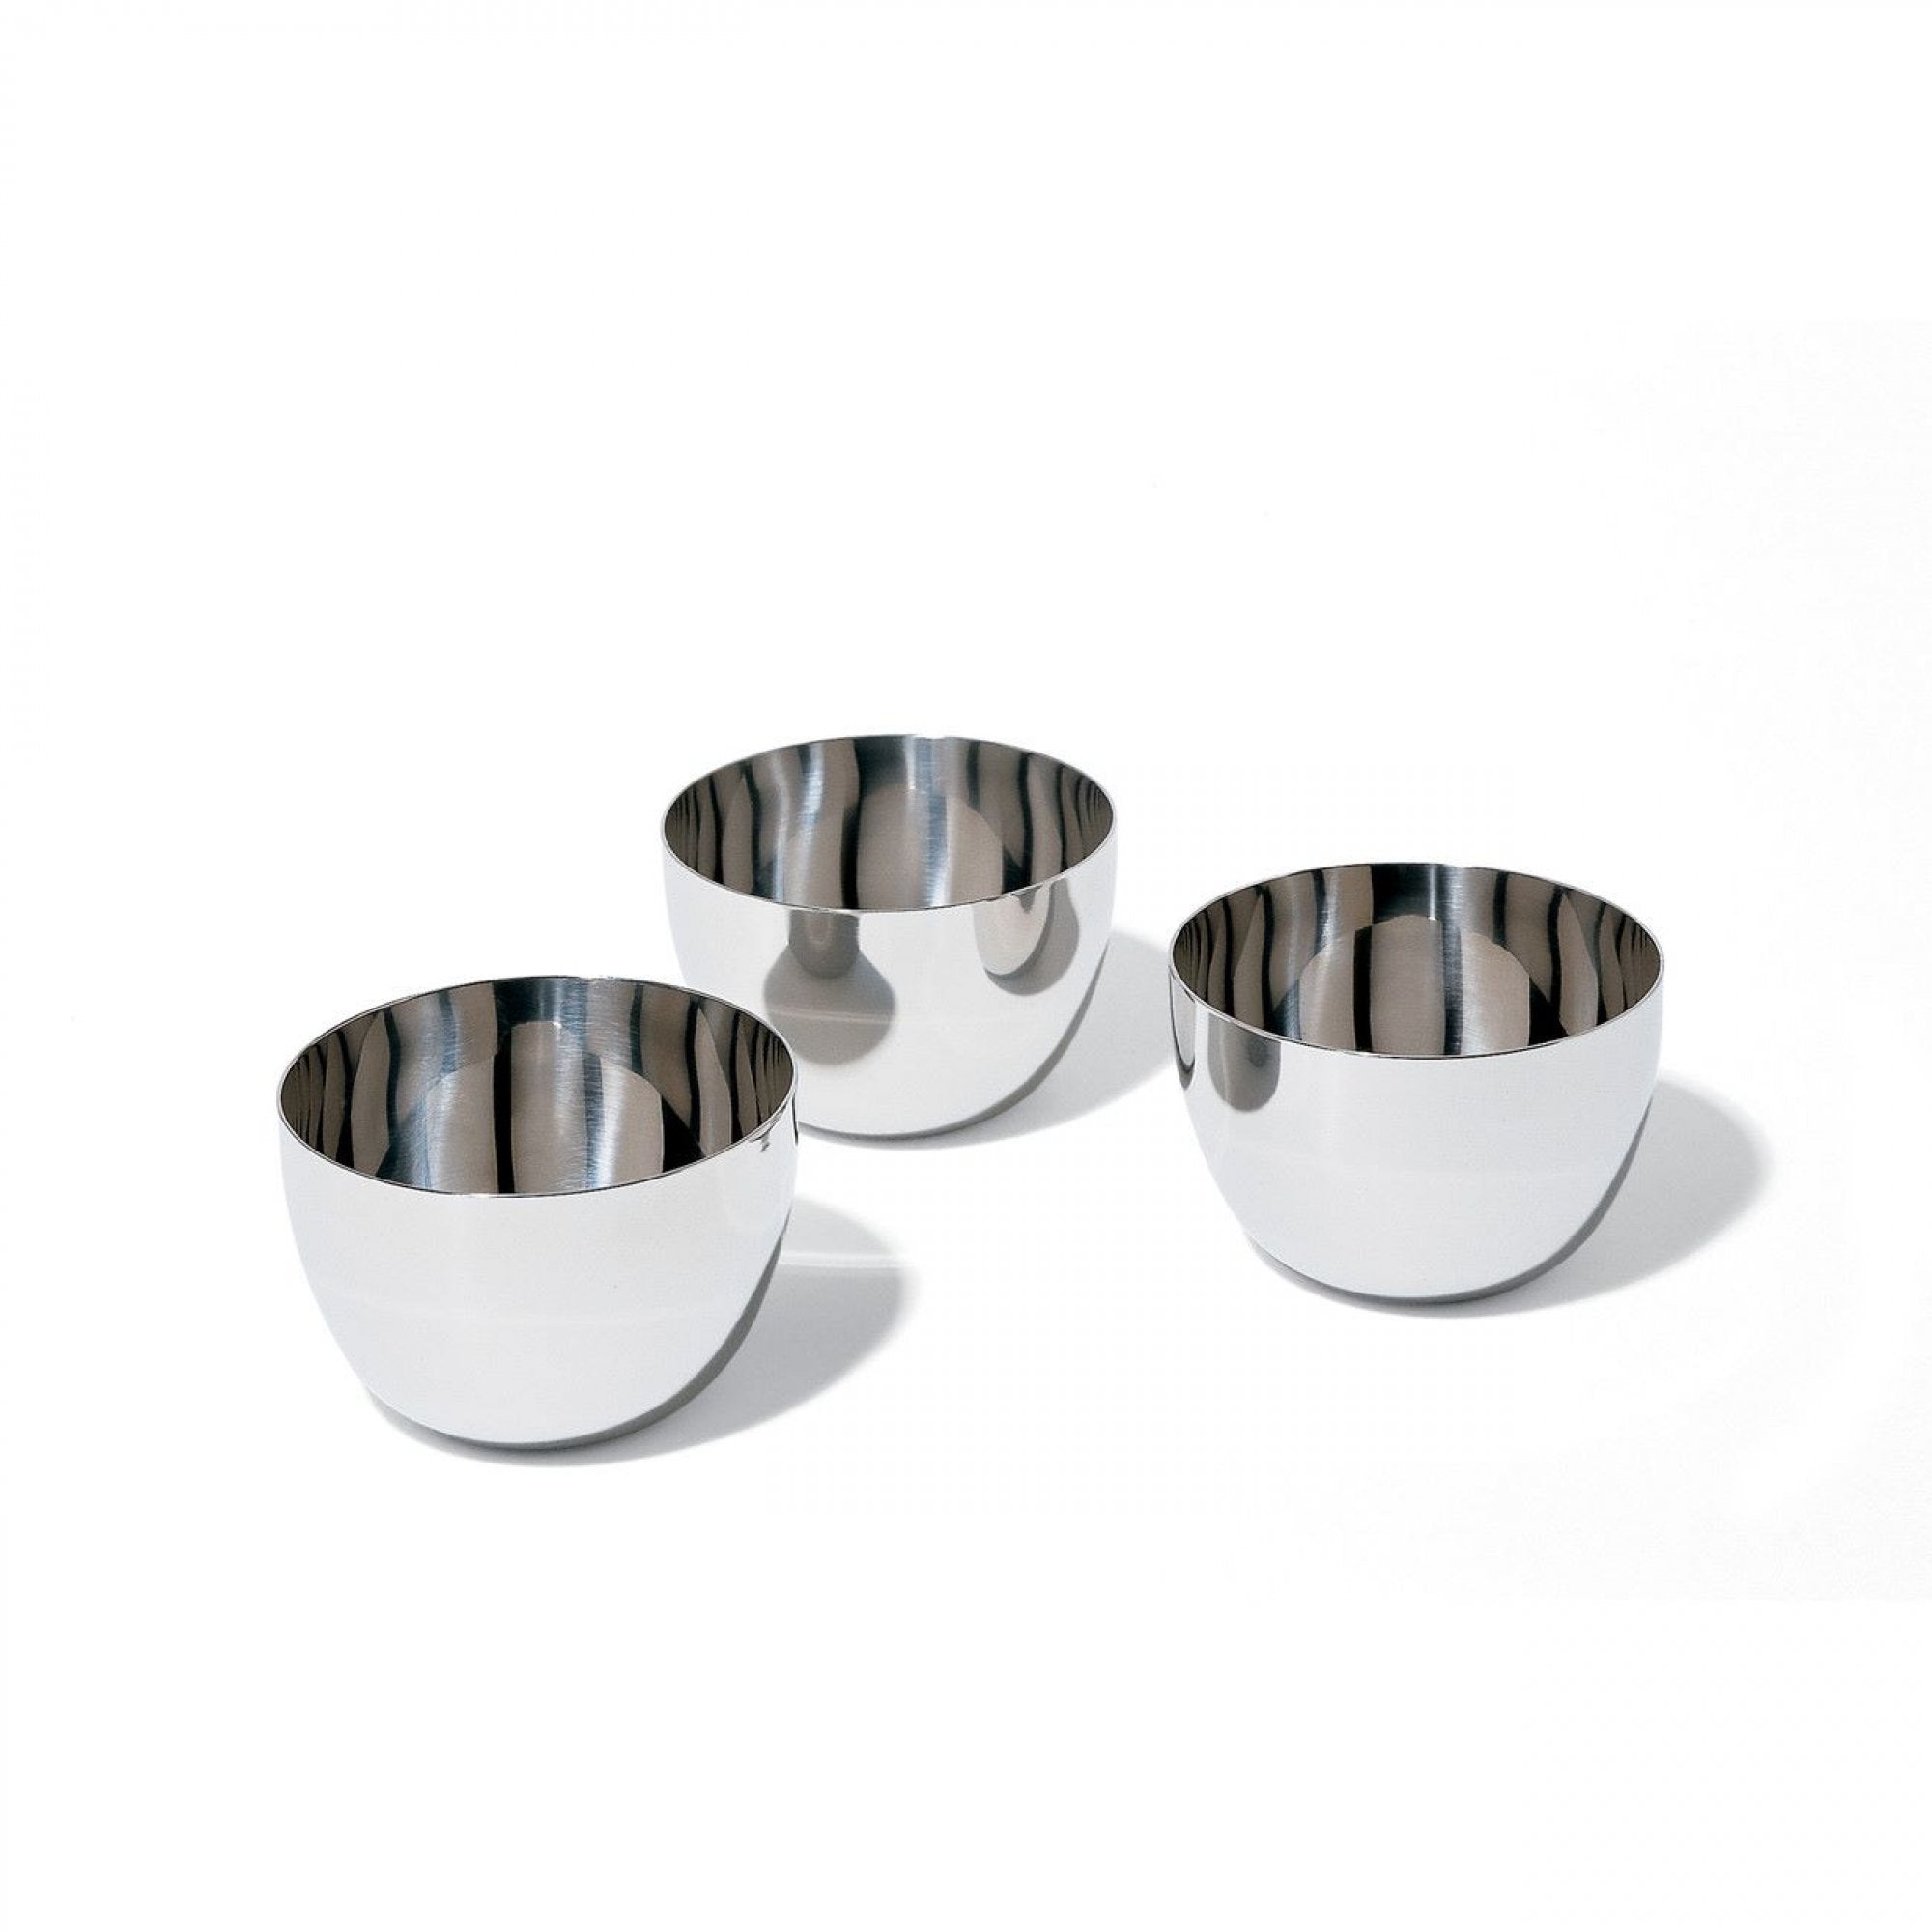 SG59 Mami Set composed of three bowls in stainless steel.